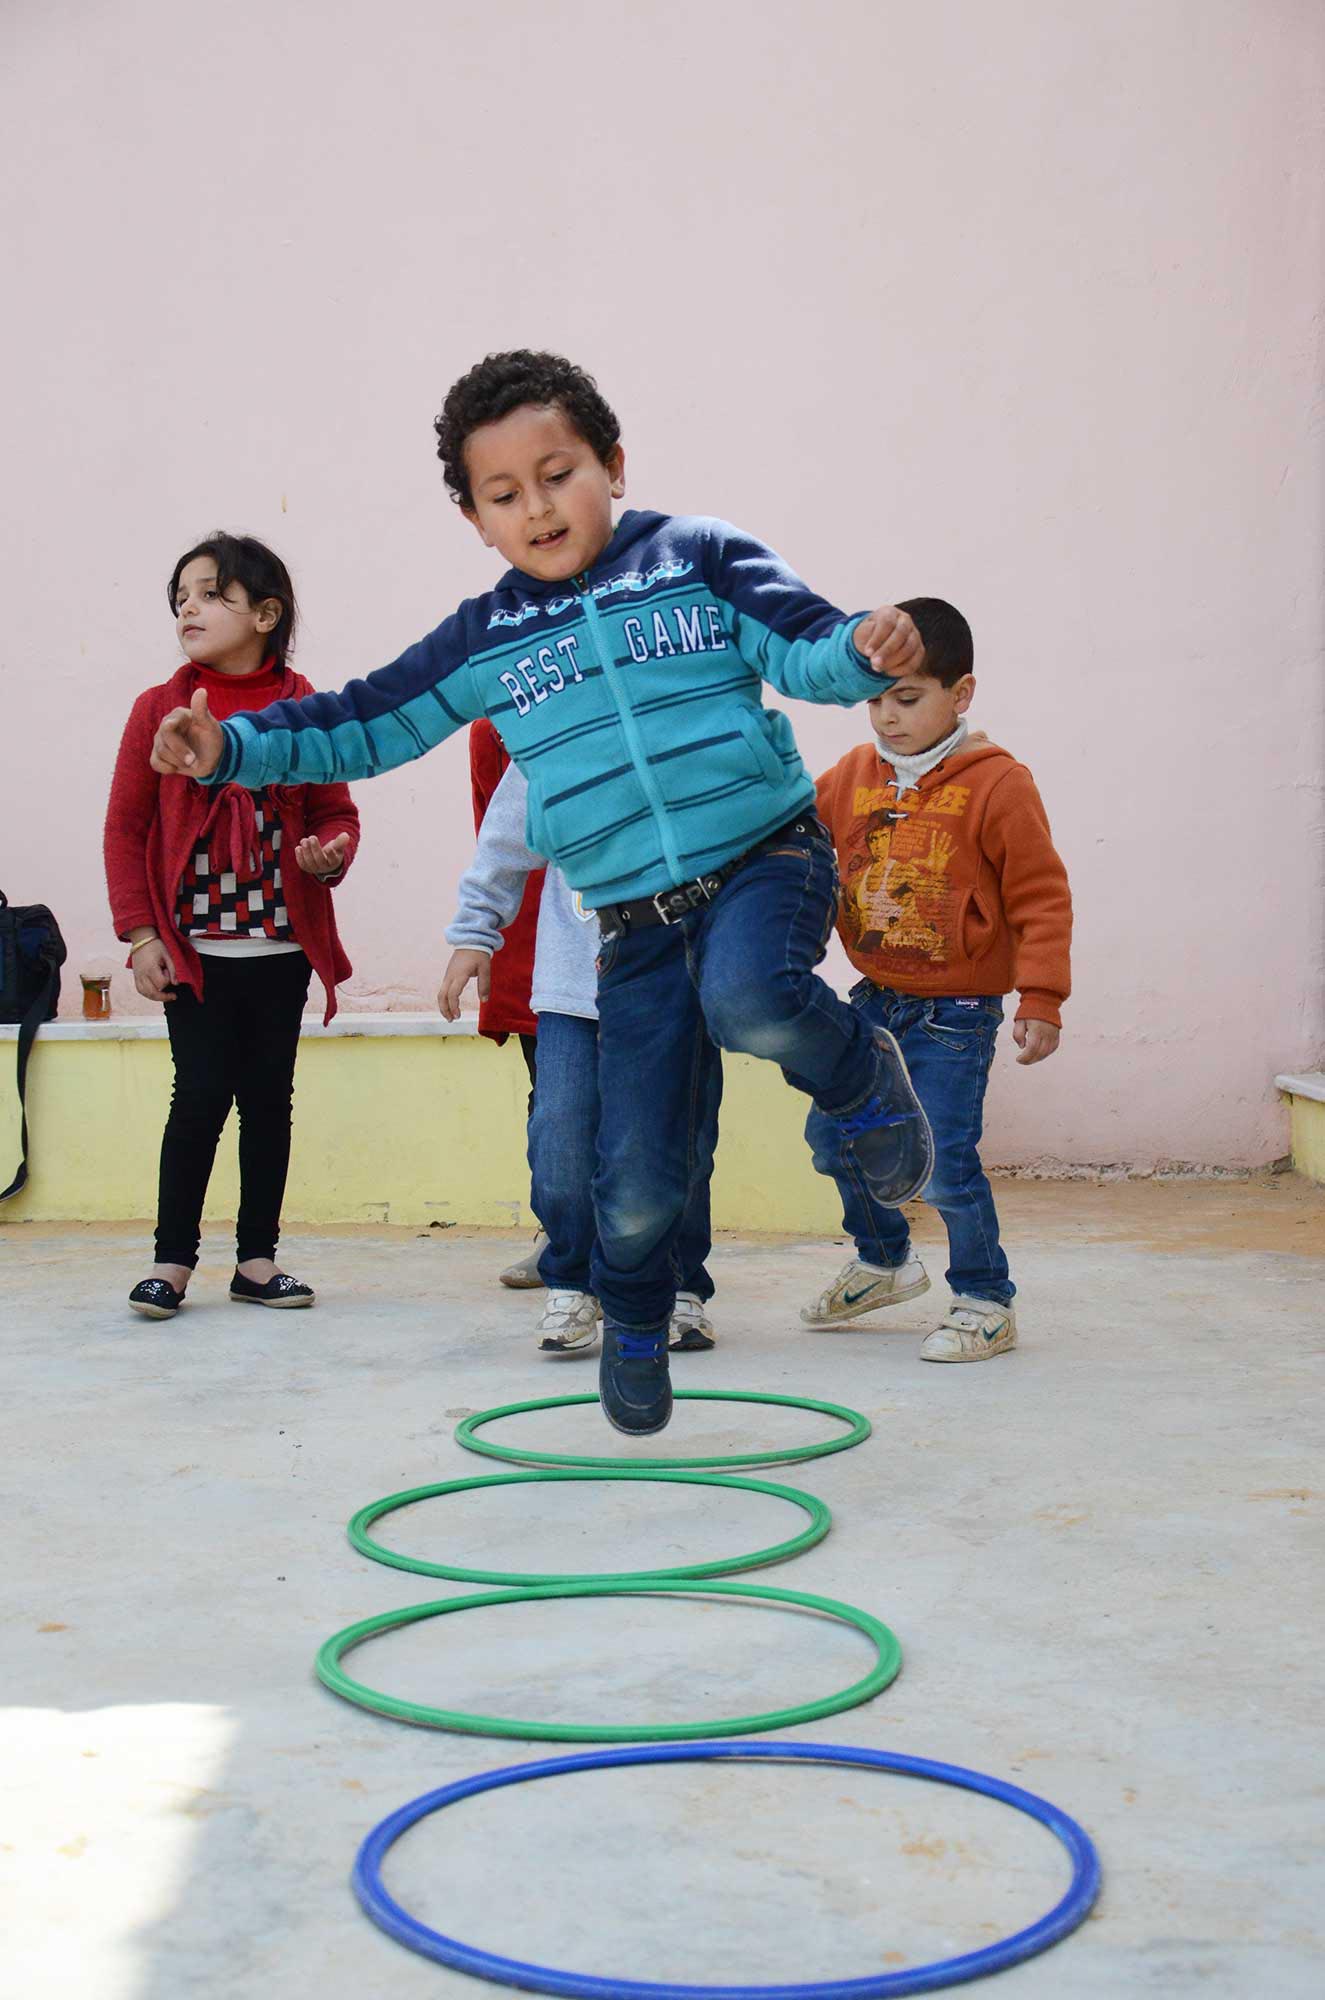 Nabil and his classmates take turns jumping into hoops during an outdoor play time.